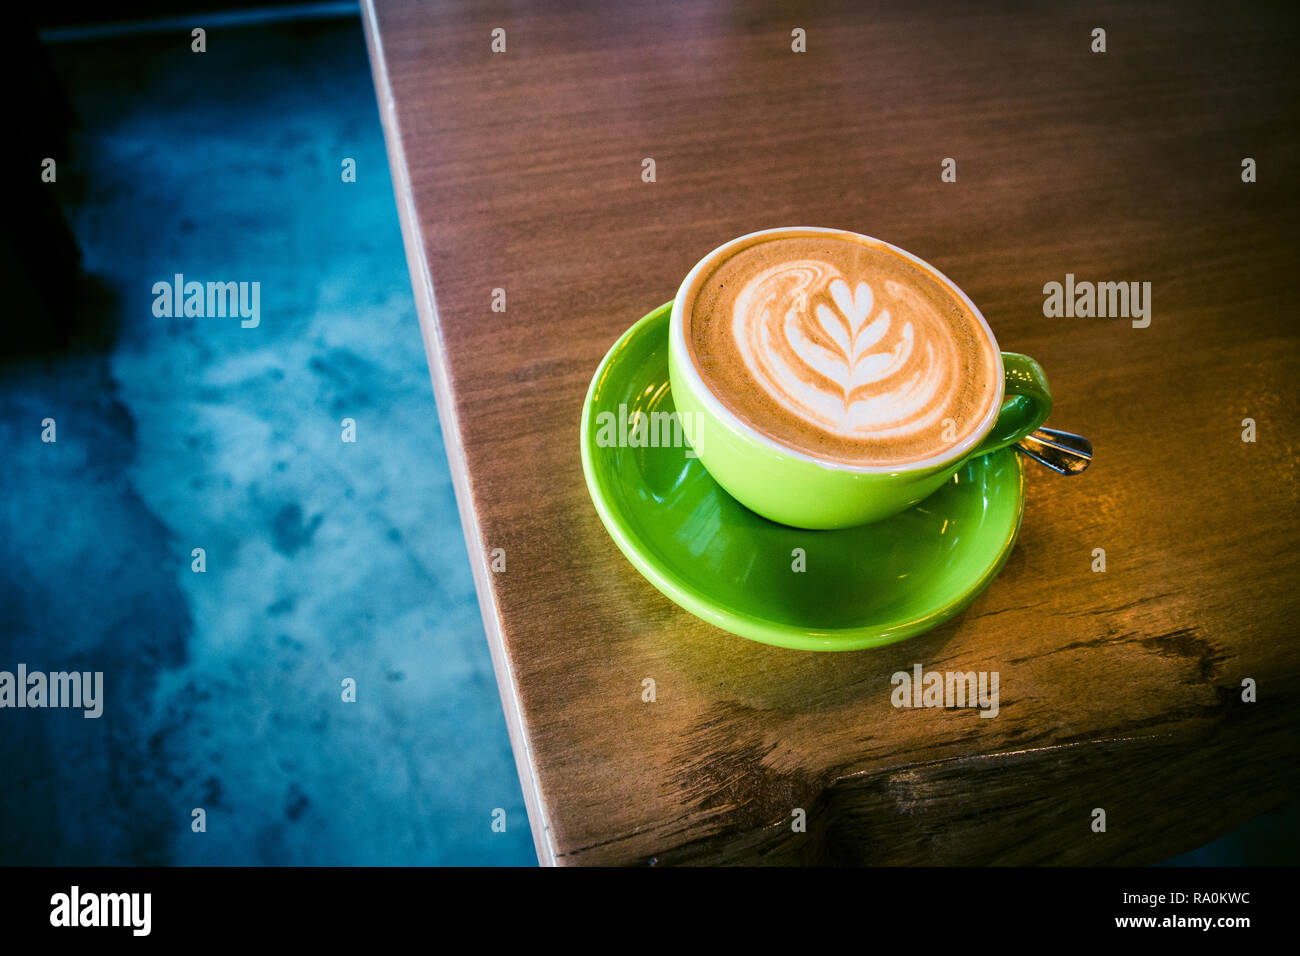 Green cup stock image. Image of blank, clean, closeup - 18564259